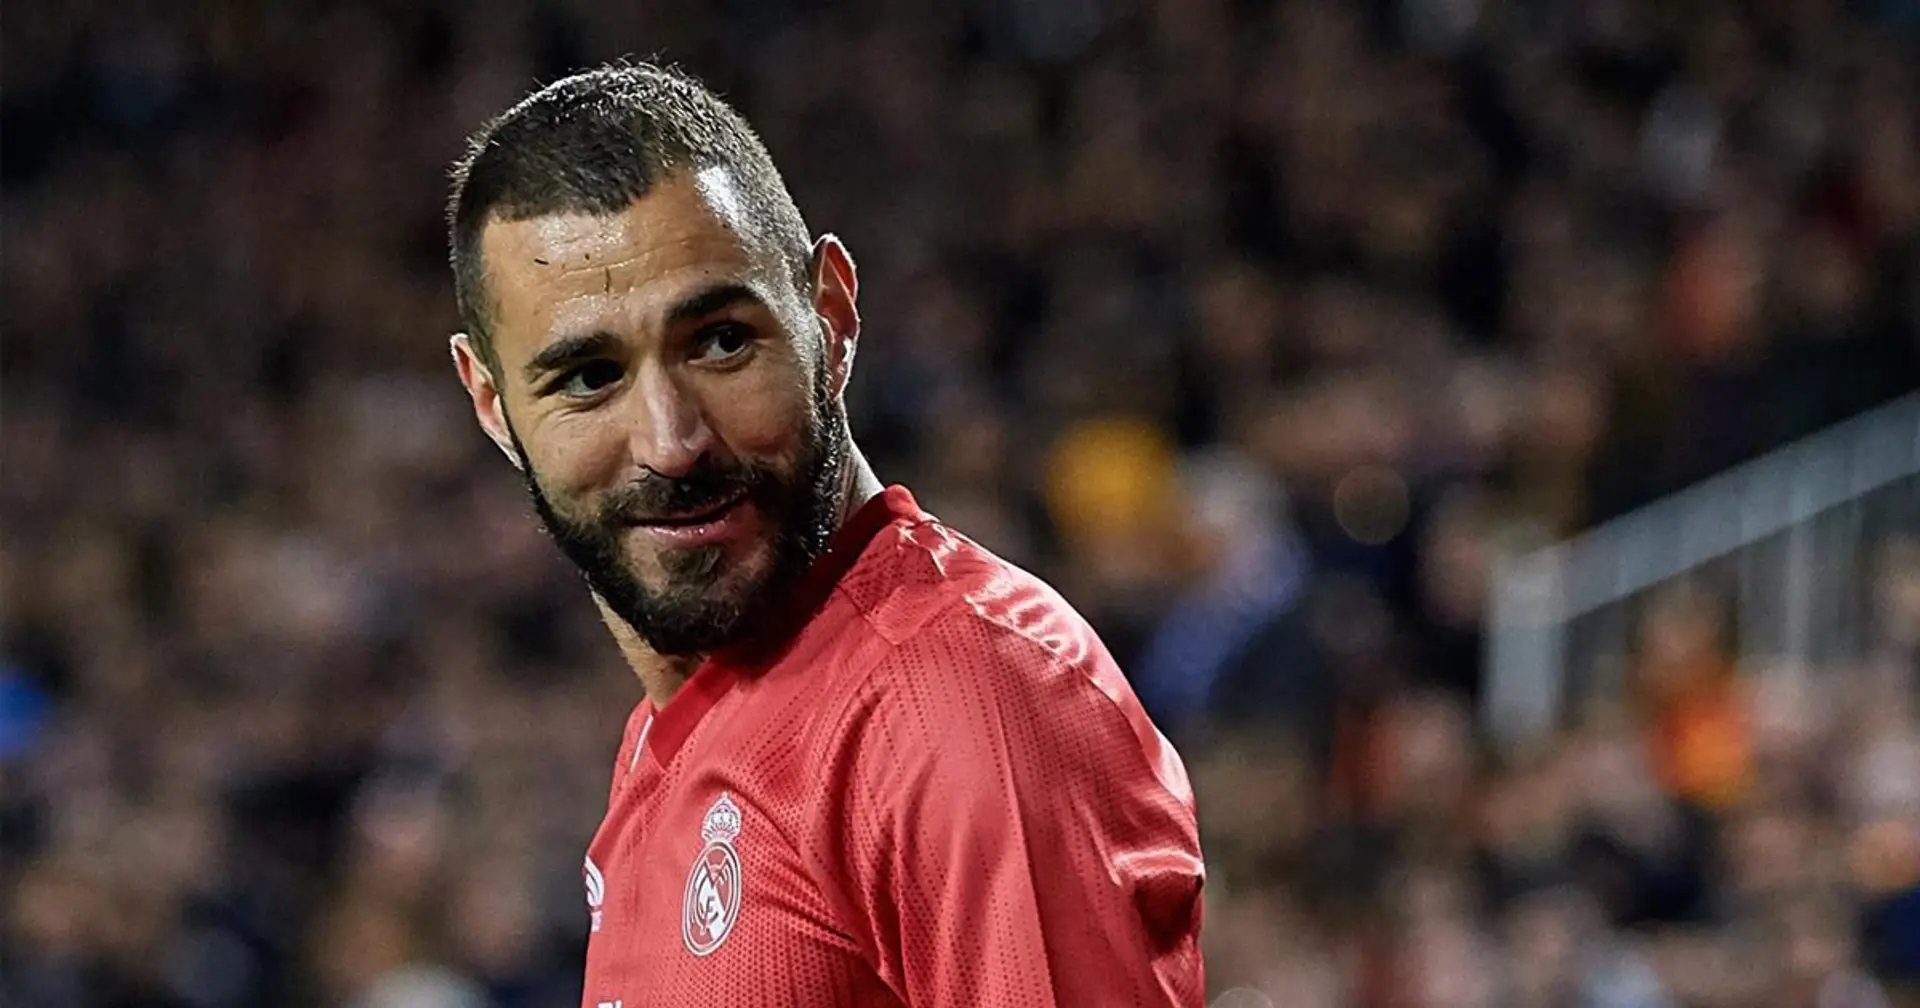 France return on cards? French FA president lauds Karim Benzema for 'the best season of his career'